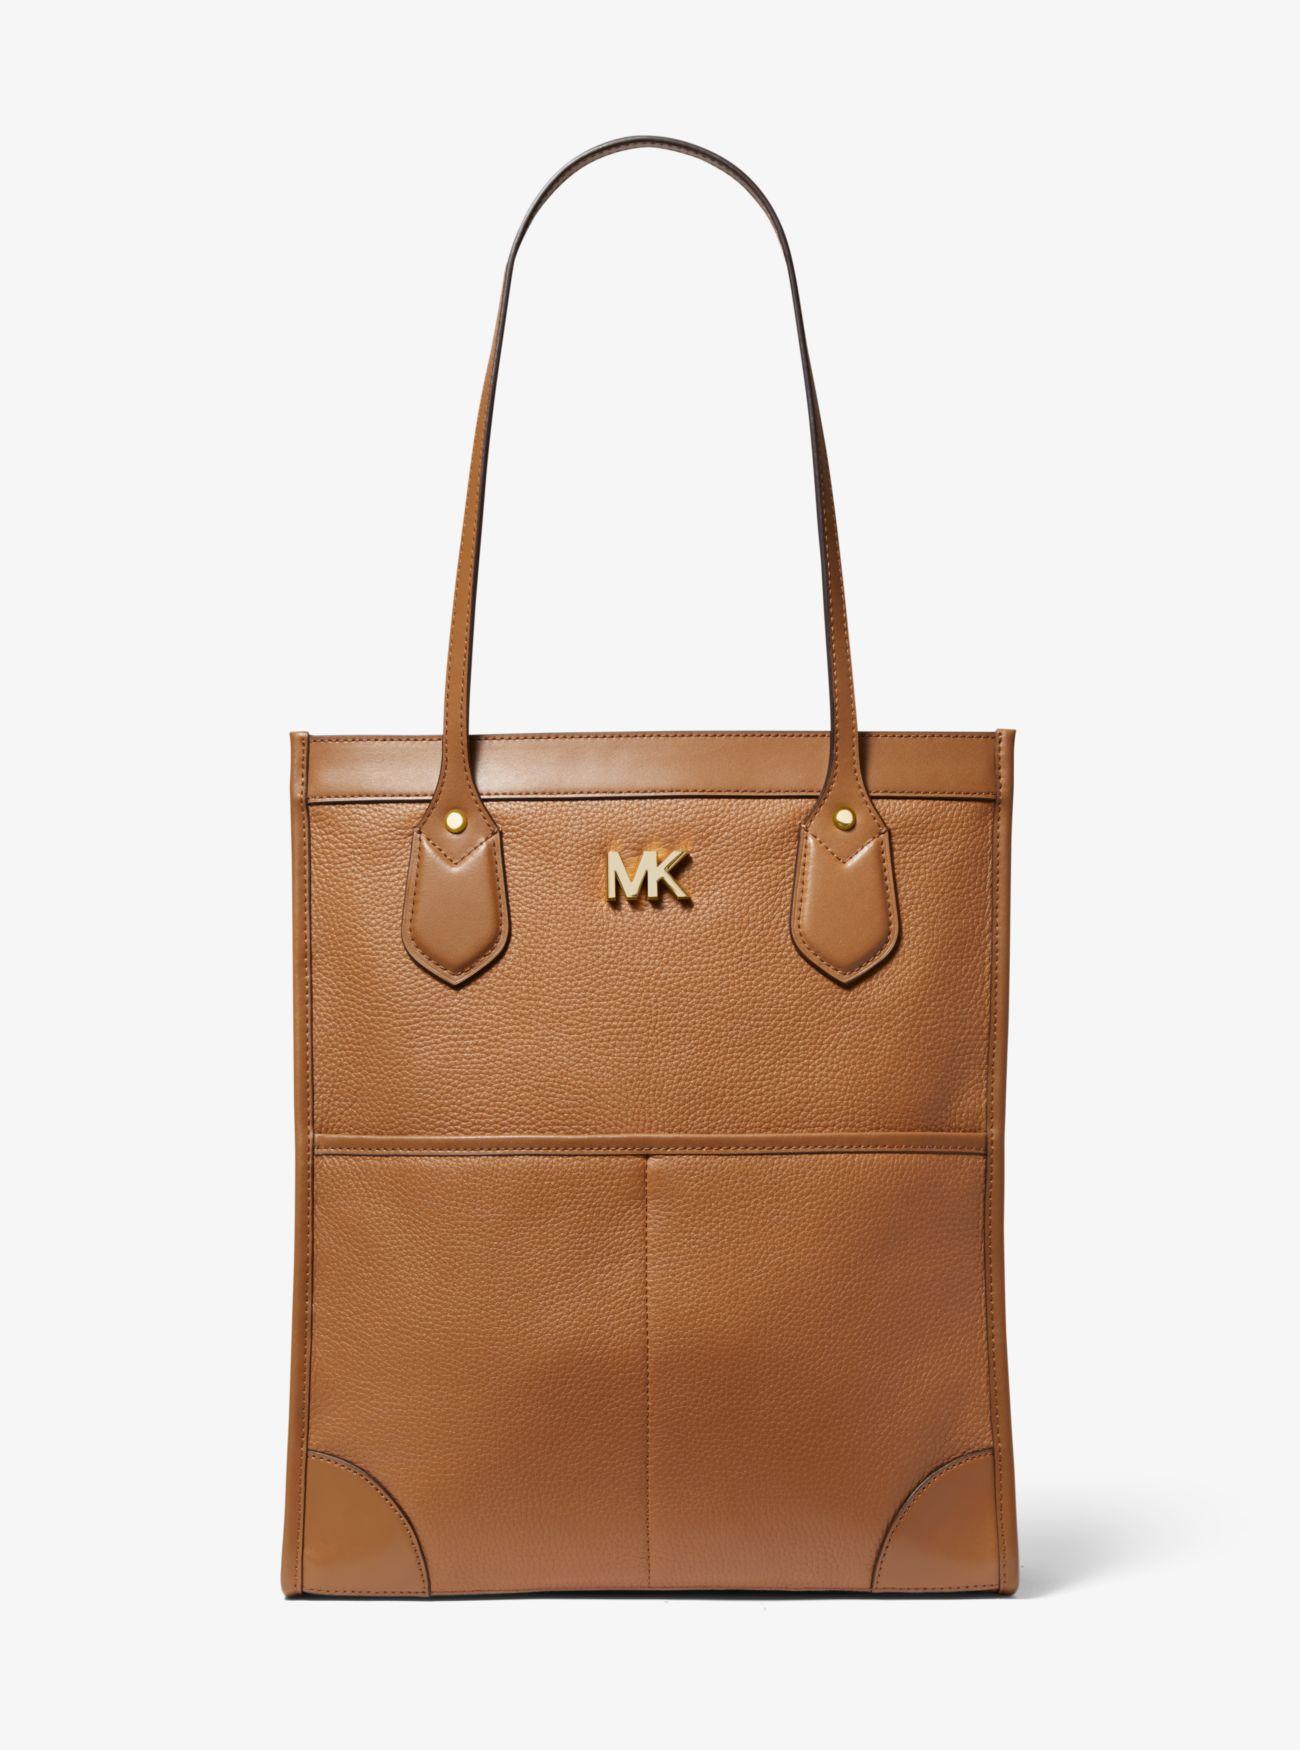 Michael Kors Bay Large Pebbled Leather Tote Bag in Brown - Lyst